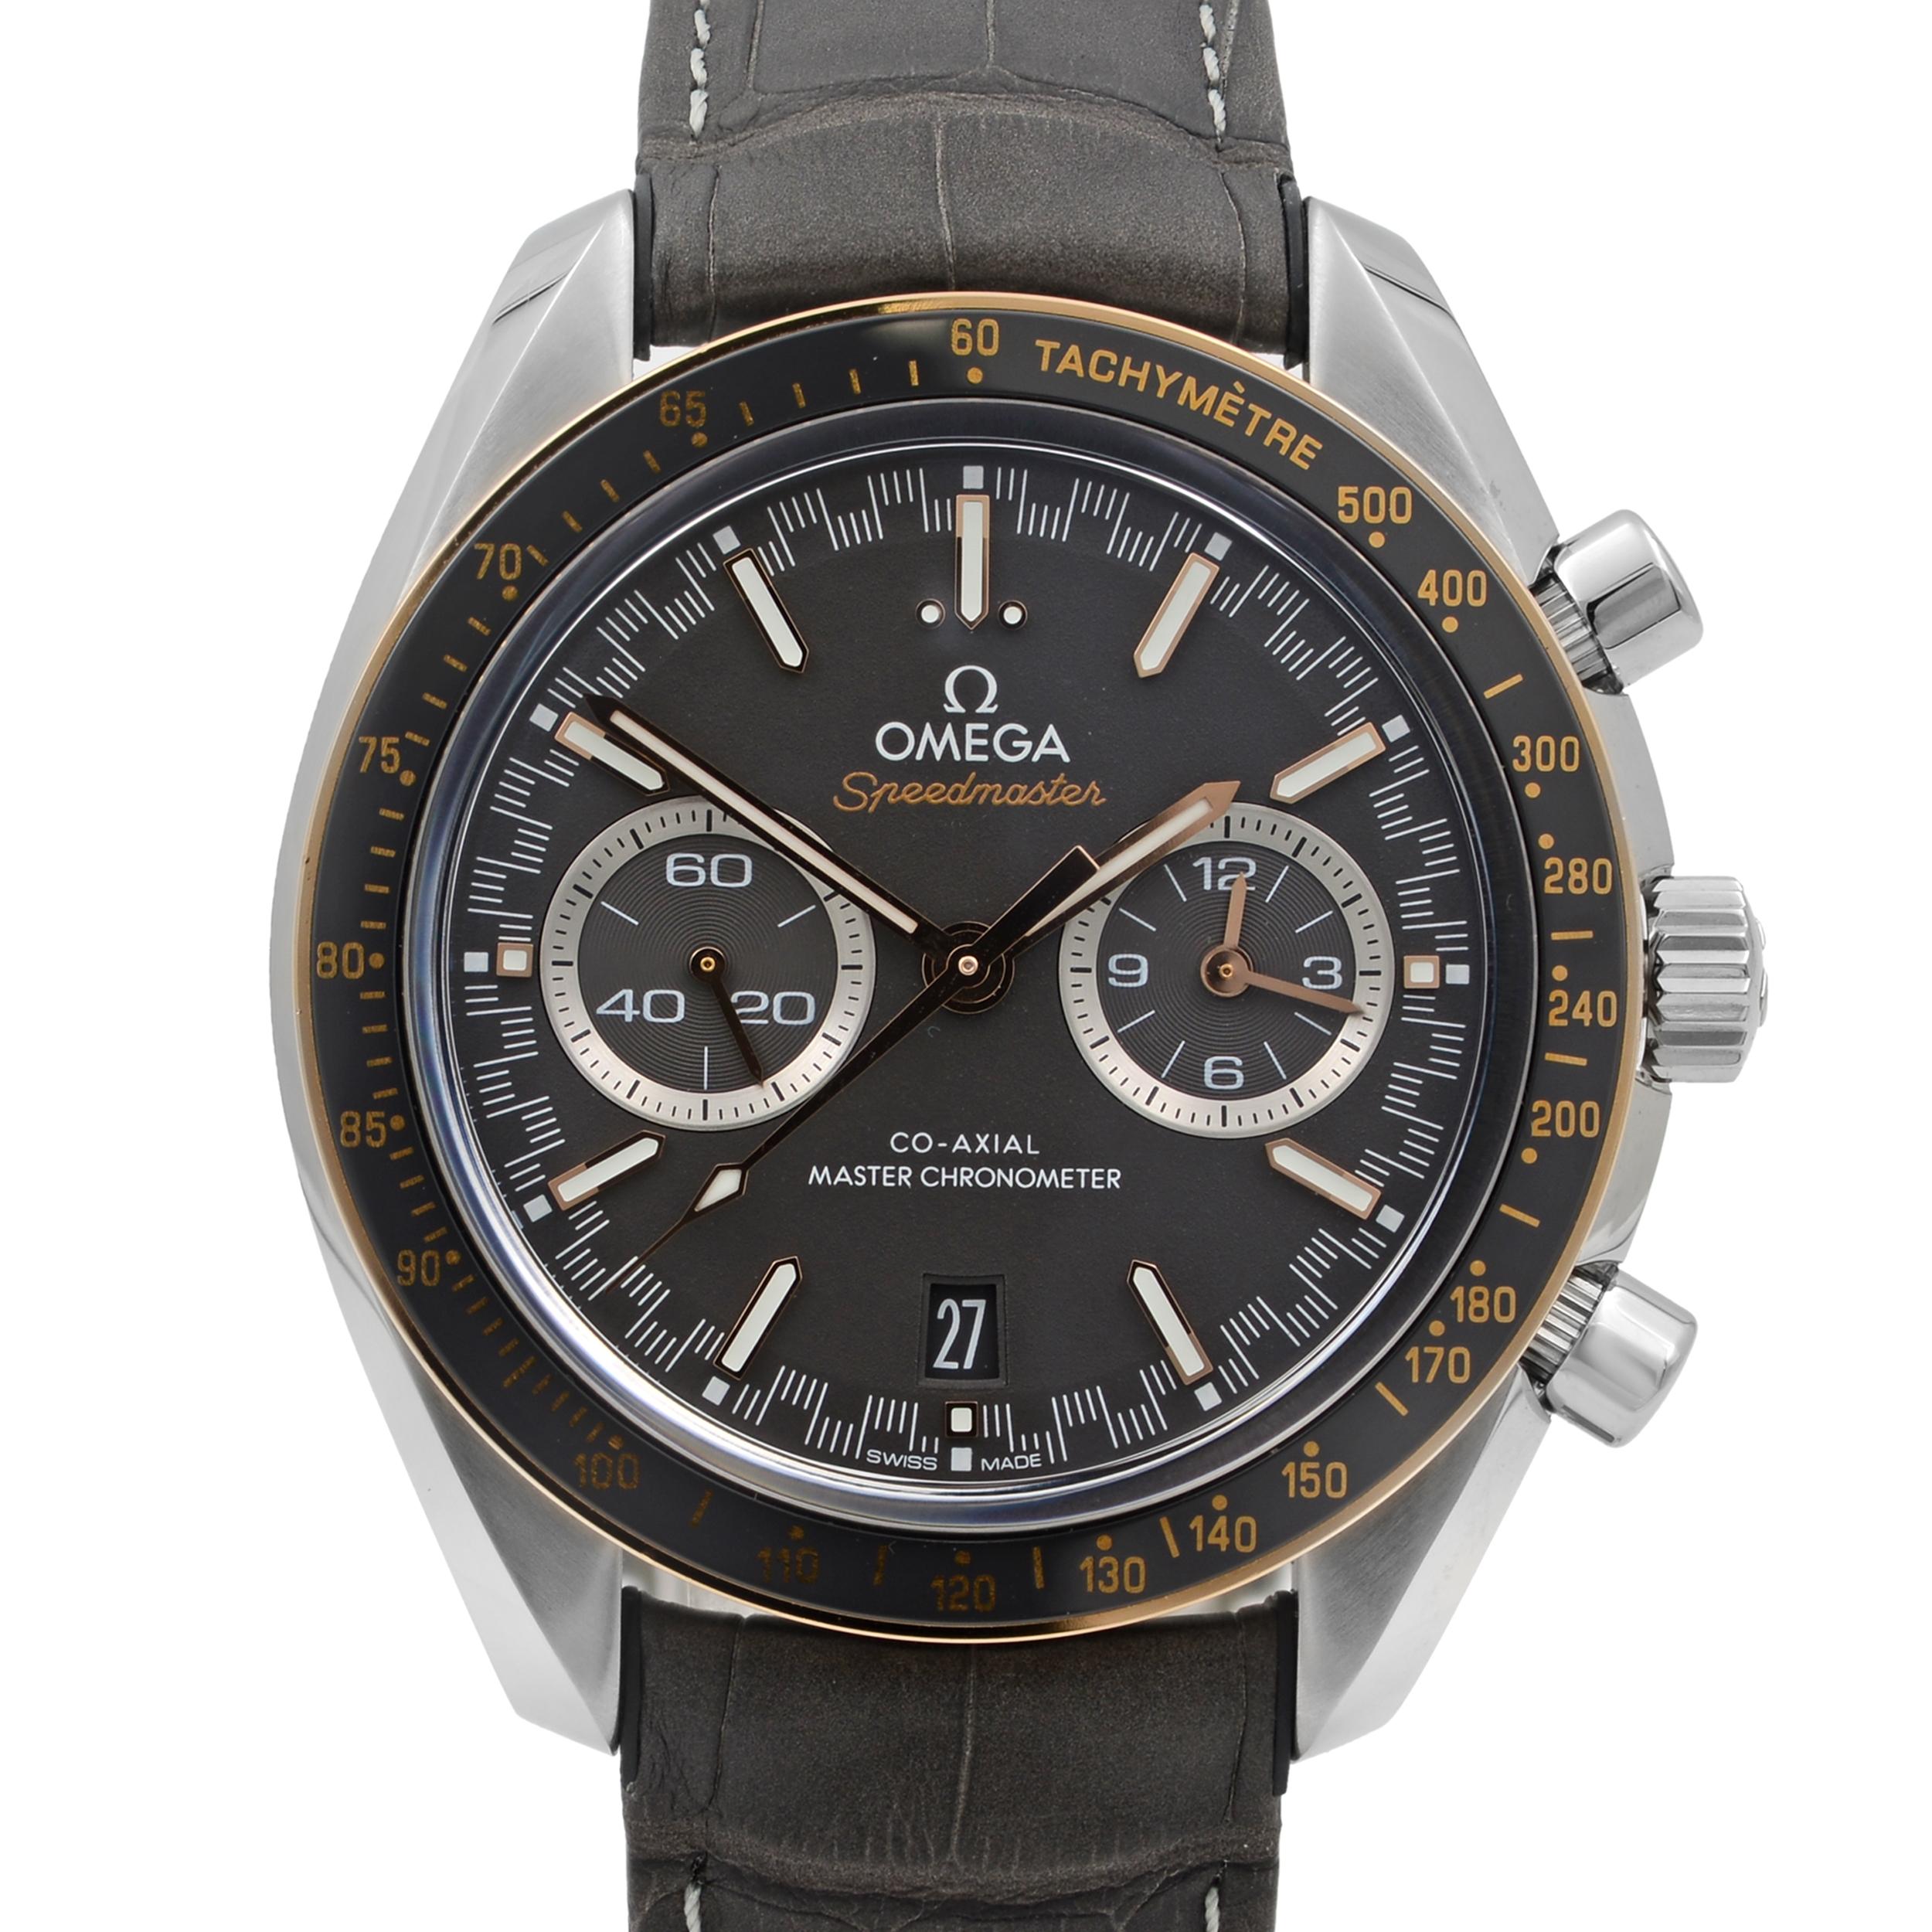 This display model Omega Speedmaster  329.23.44.51.06.001 is a beautiful men's timepiece that is powered by mechanical (automatic) movement which is cased in a stainless steel case. It has a round shape face, chronograph, date indicator, small